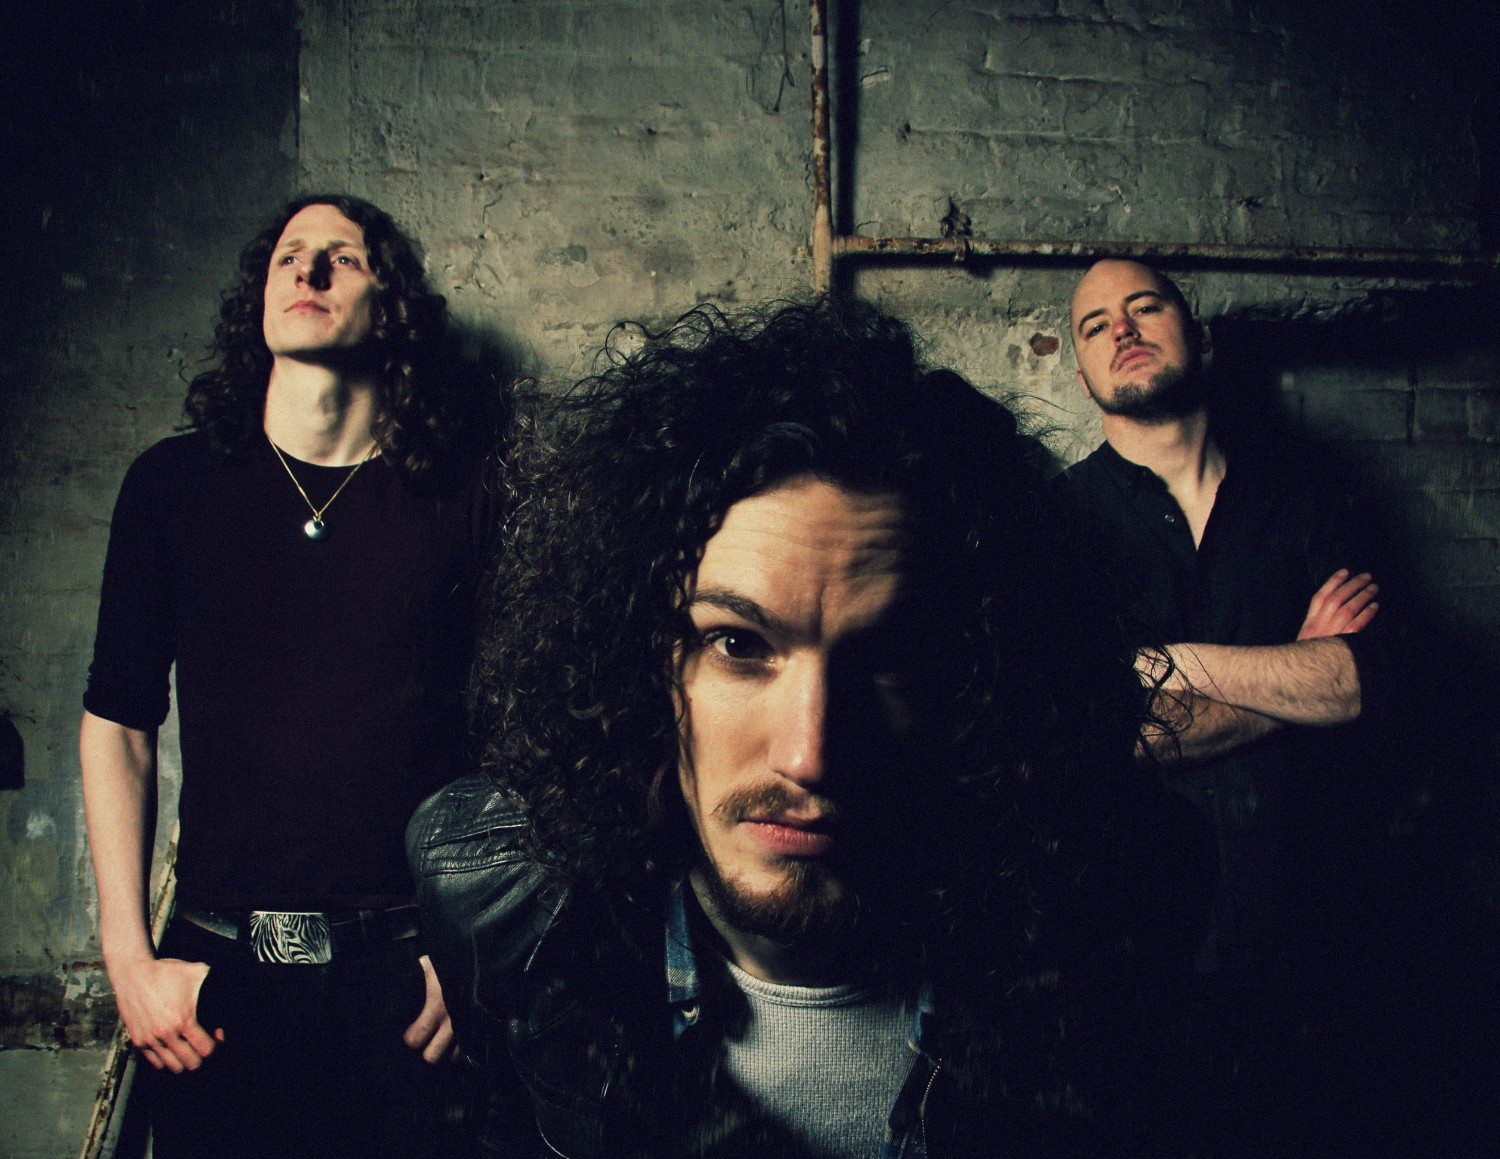 RavenEye’s Oli Brown is Ready For a May 2 Show at Irving Plaza With The Darkness, Talks New Music and More